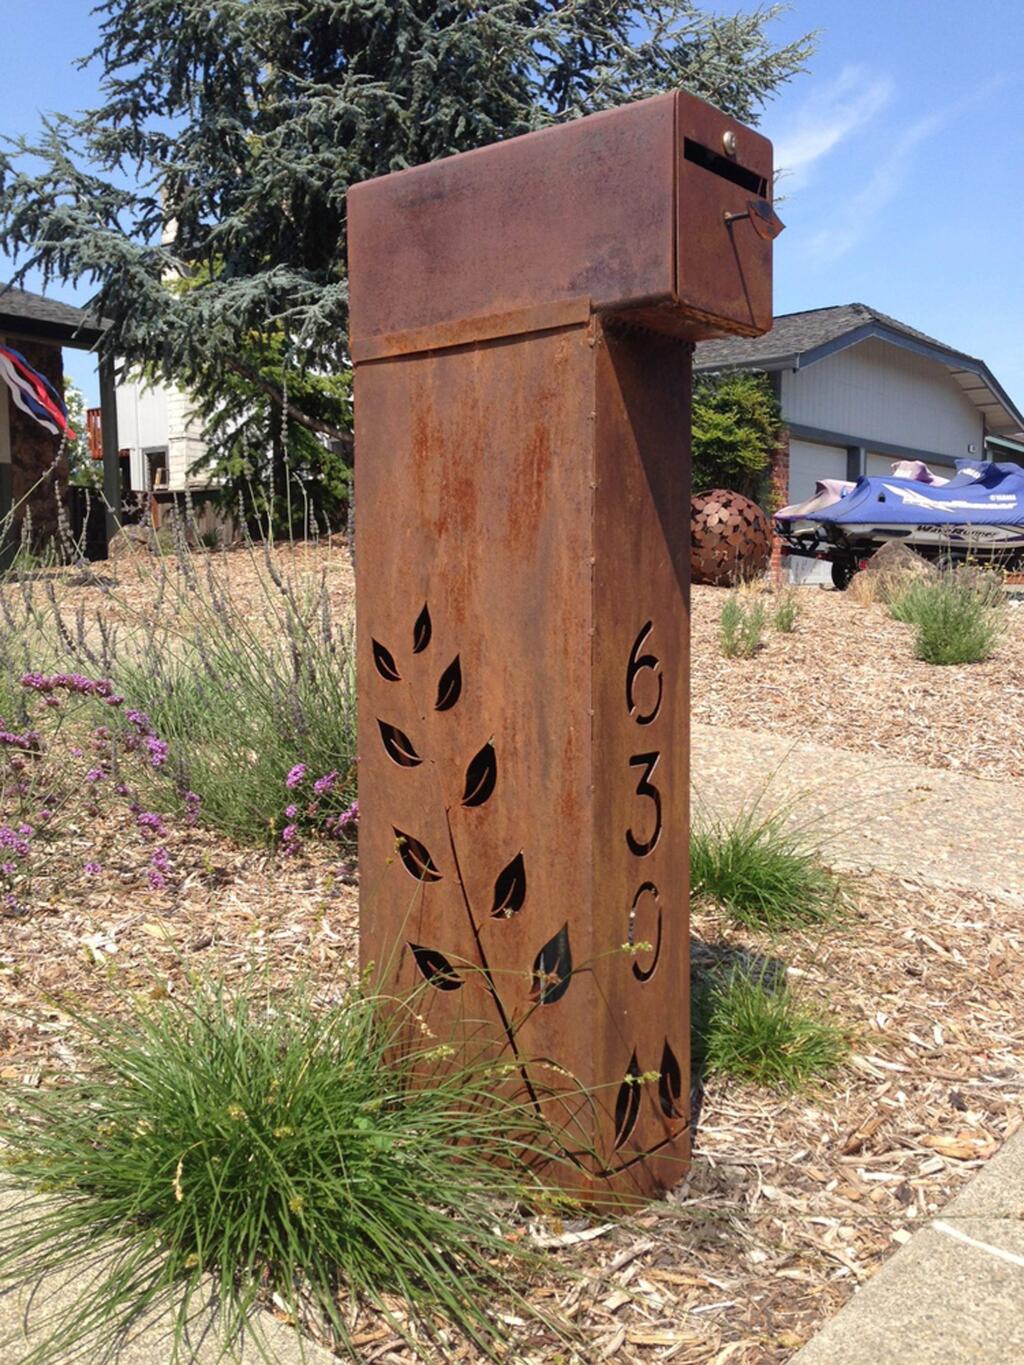 David Fowler DesignsIn addition to landscape sculptures, lighting and gates, Santa Rosa landscape designer and sculptor David Fowler creates items such as this mailbox with address number. Mailboxes and Address numbers. 'Little touches go a long way towards making our homes and businesses stand apart and away from the crowd. Custom cut address numbers are an affordable and easy way to add a sophisticated look to your home. I can also create the mailbox of your dreams out of steel,' says Fowler.